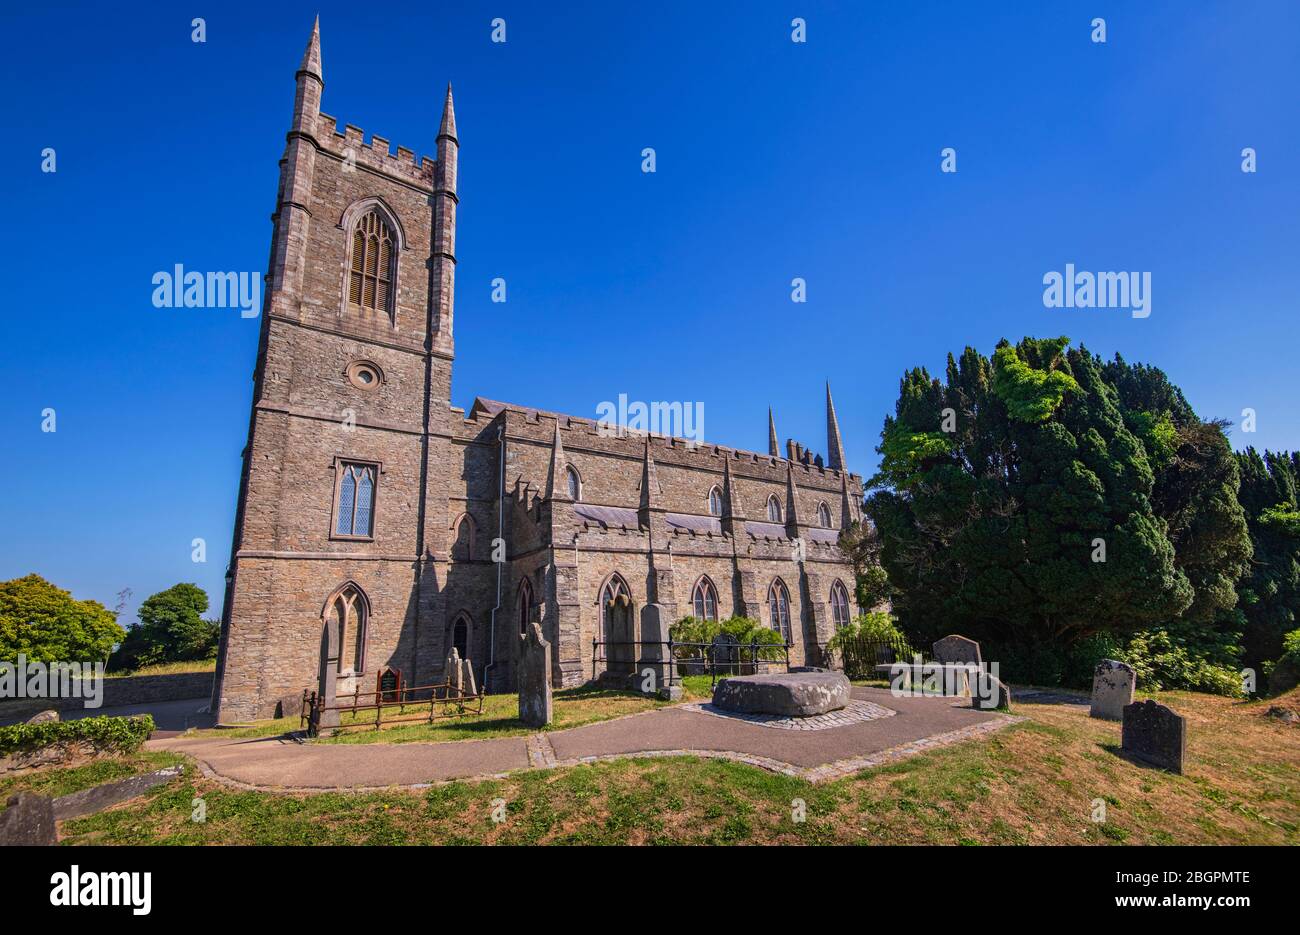 Ireland, County Down, Downpatrick, Cathedral Church of the Holy Trinity also known as Down Cathedral with Mourne granite slab marking the traditional burial place of St Patrick in the foreground. Stock Photo